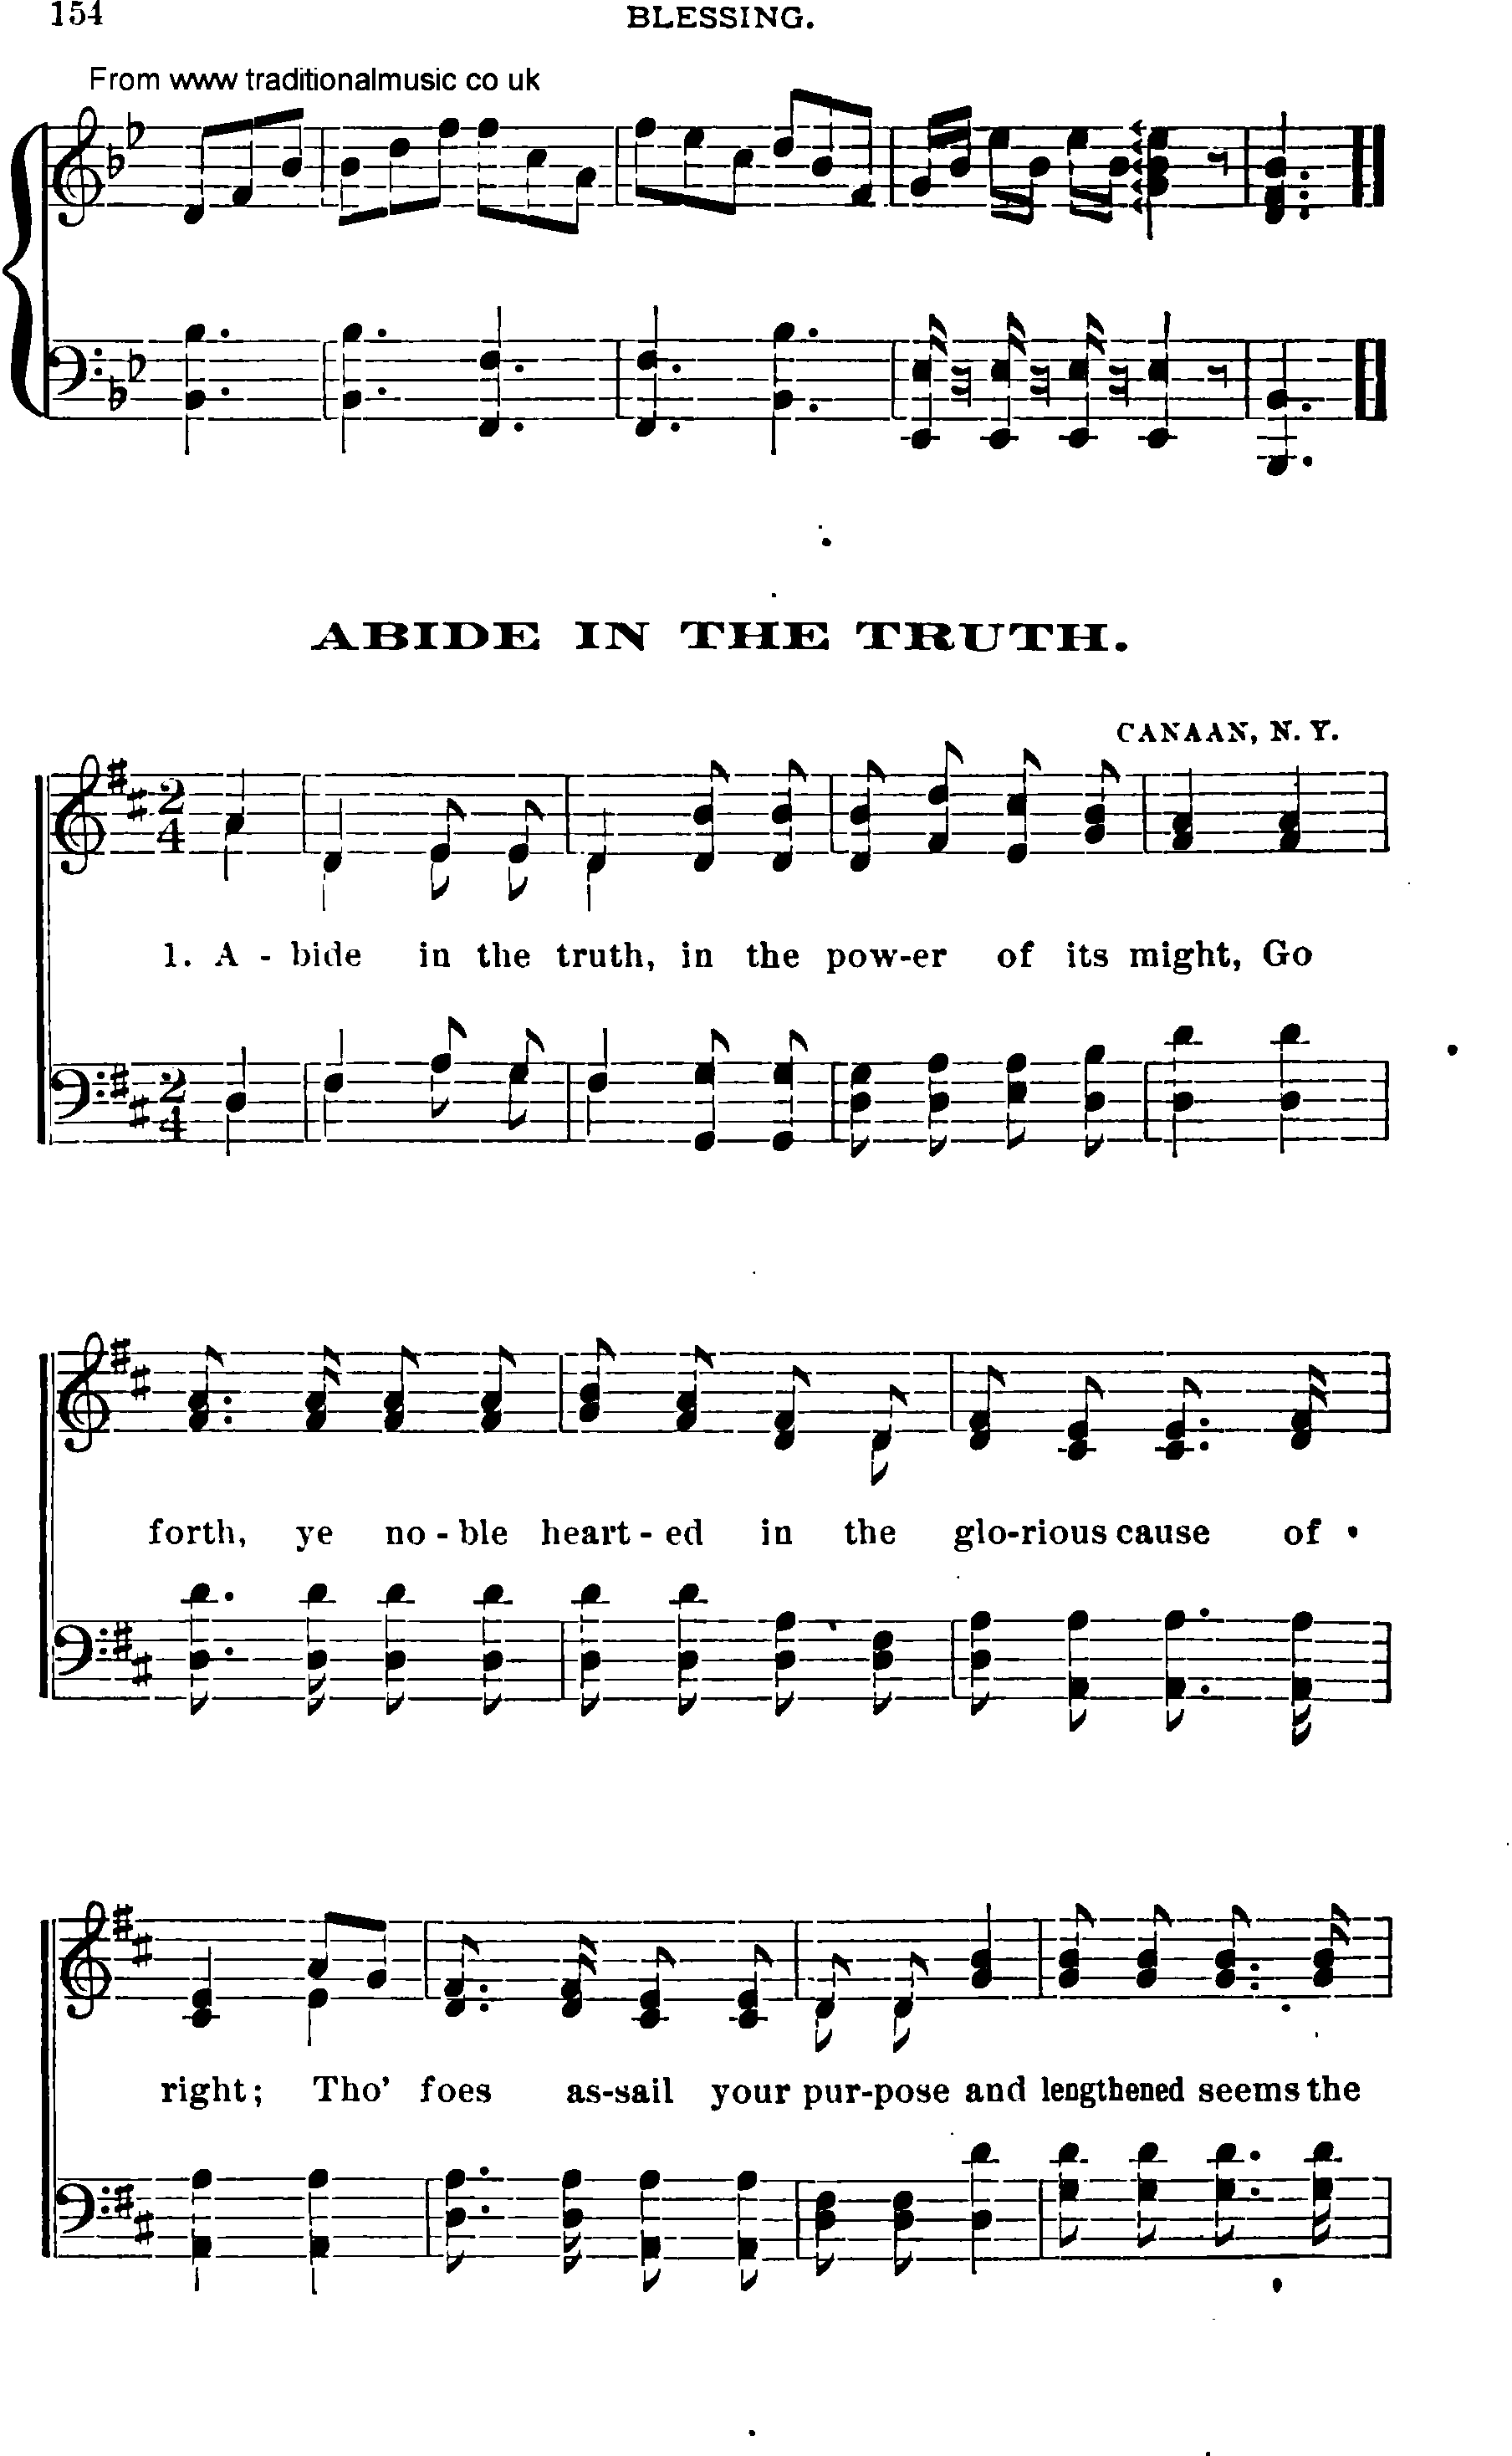 Shaker Music collection, Hymn: abide in the truth, sheetmusic and PDF